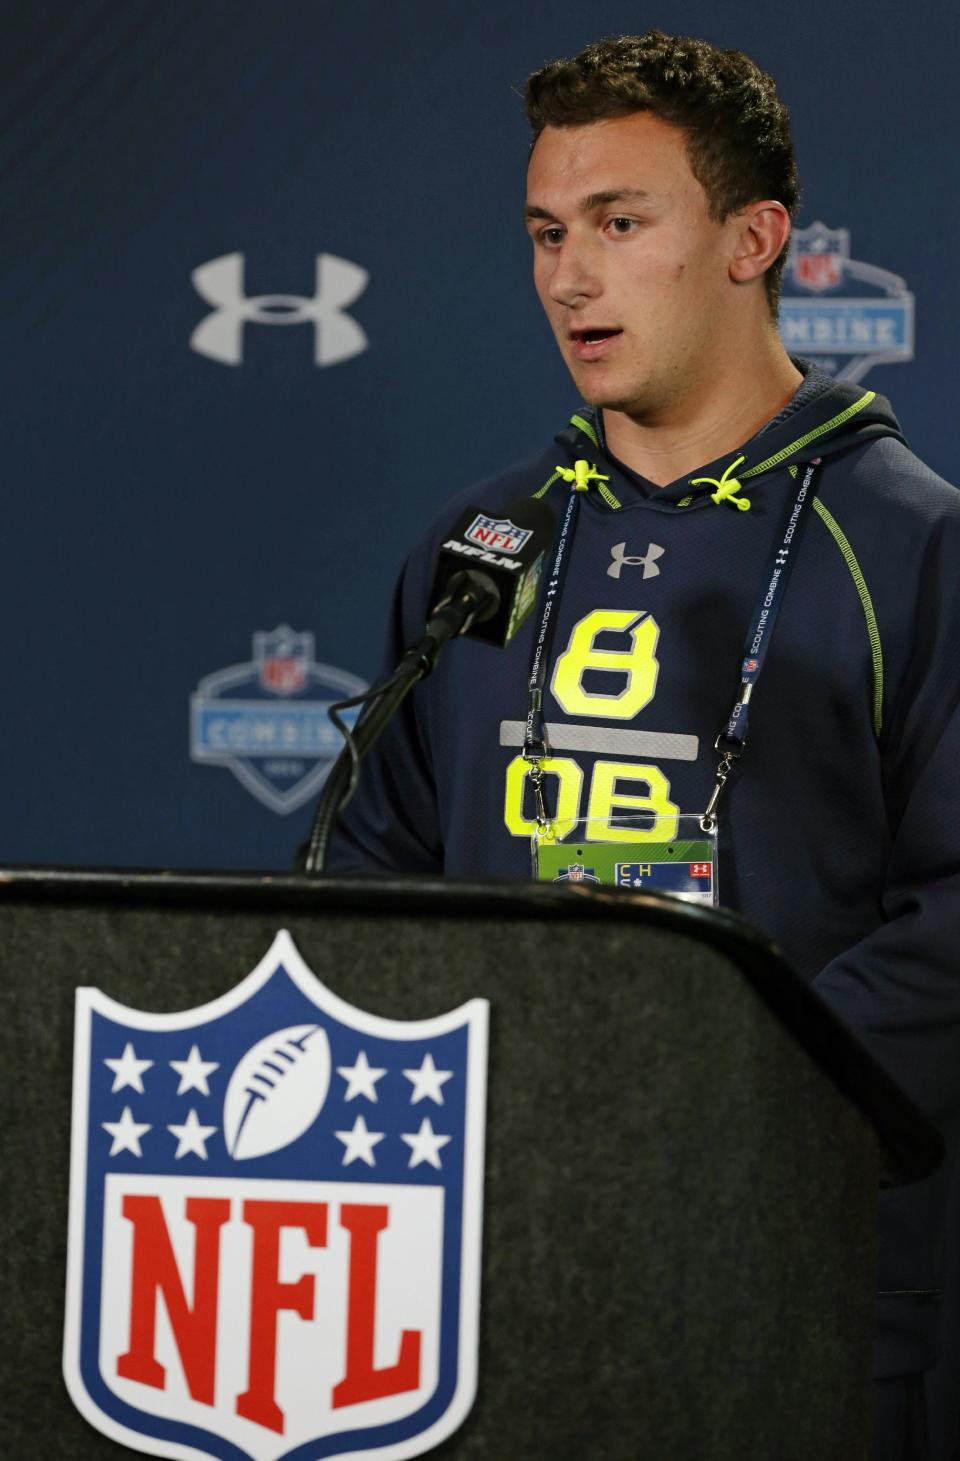 Texas A&M quarterback Johnny Manziel answers a question during a news conference at the NFL football scouting combine in Indianapolis, Friday, Feb. 21, 2014. (AP Photo/Michael Conroy)